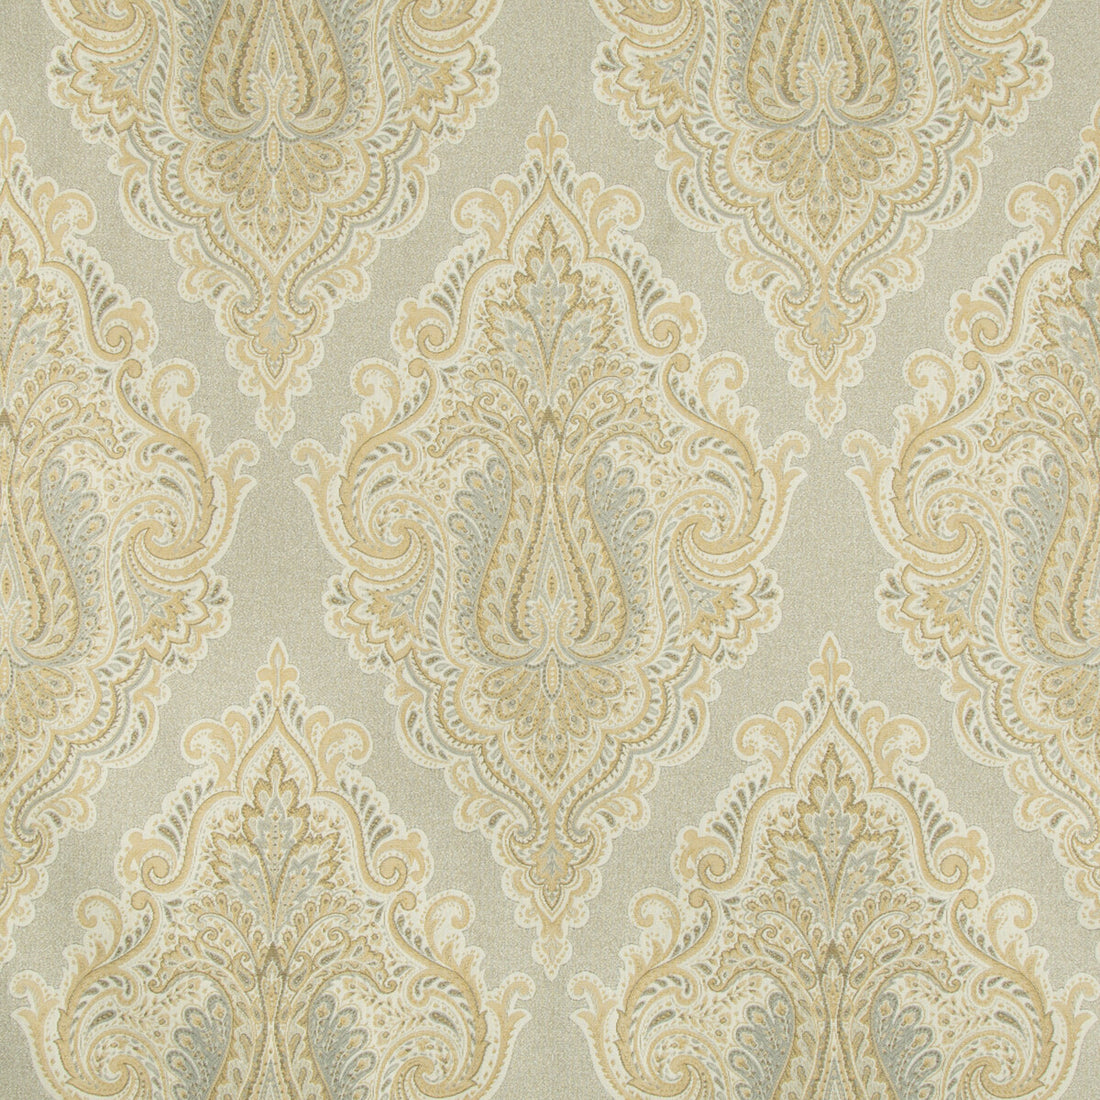 Kravet Design fabric in 34679-16 color - pattern 34679.16.0 - by Kravet Design in the Crypton Home collection